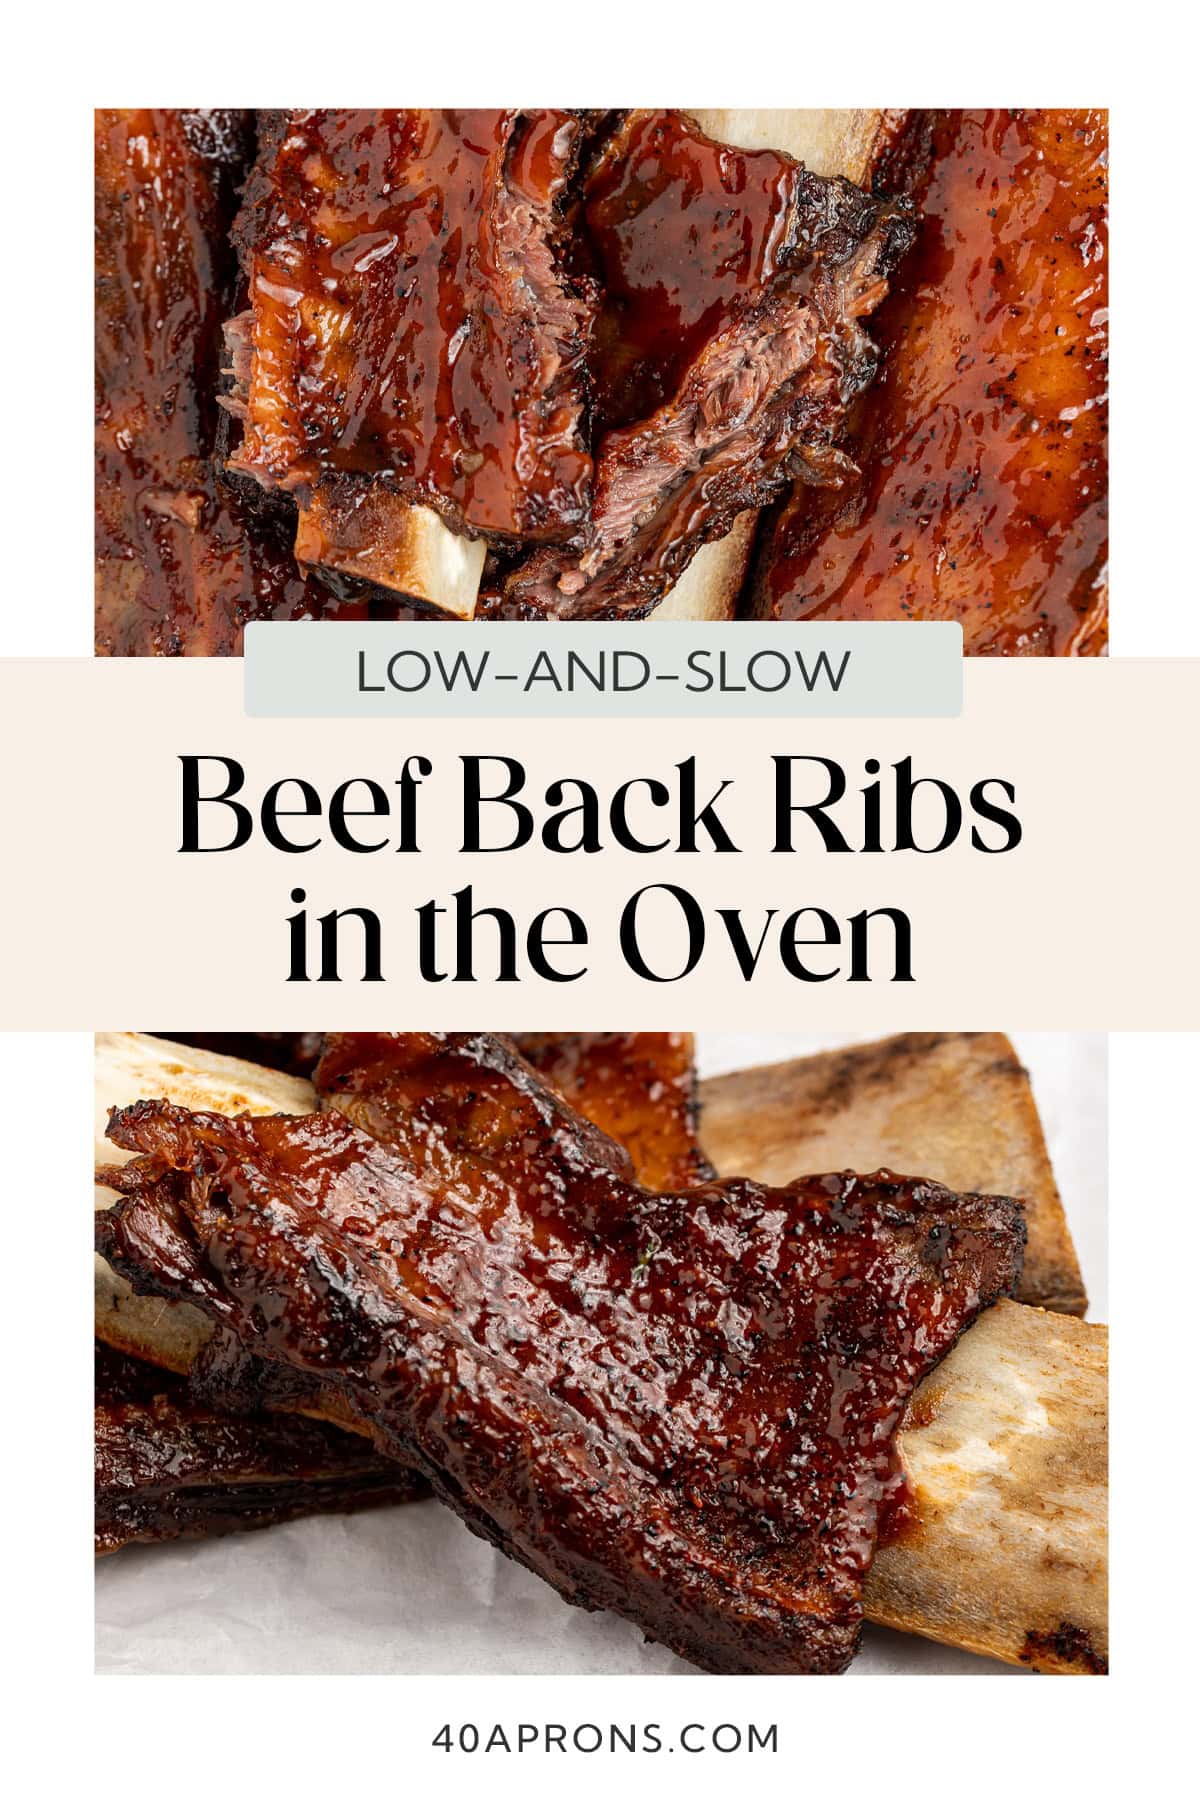 Pin graphic for beef back ribs in the oven.